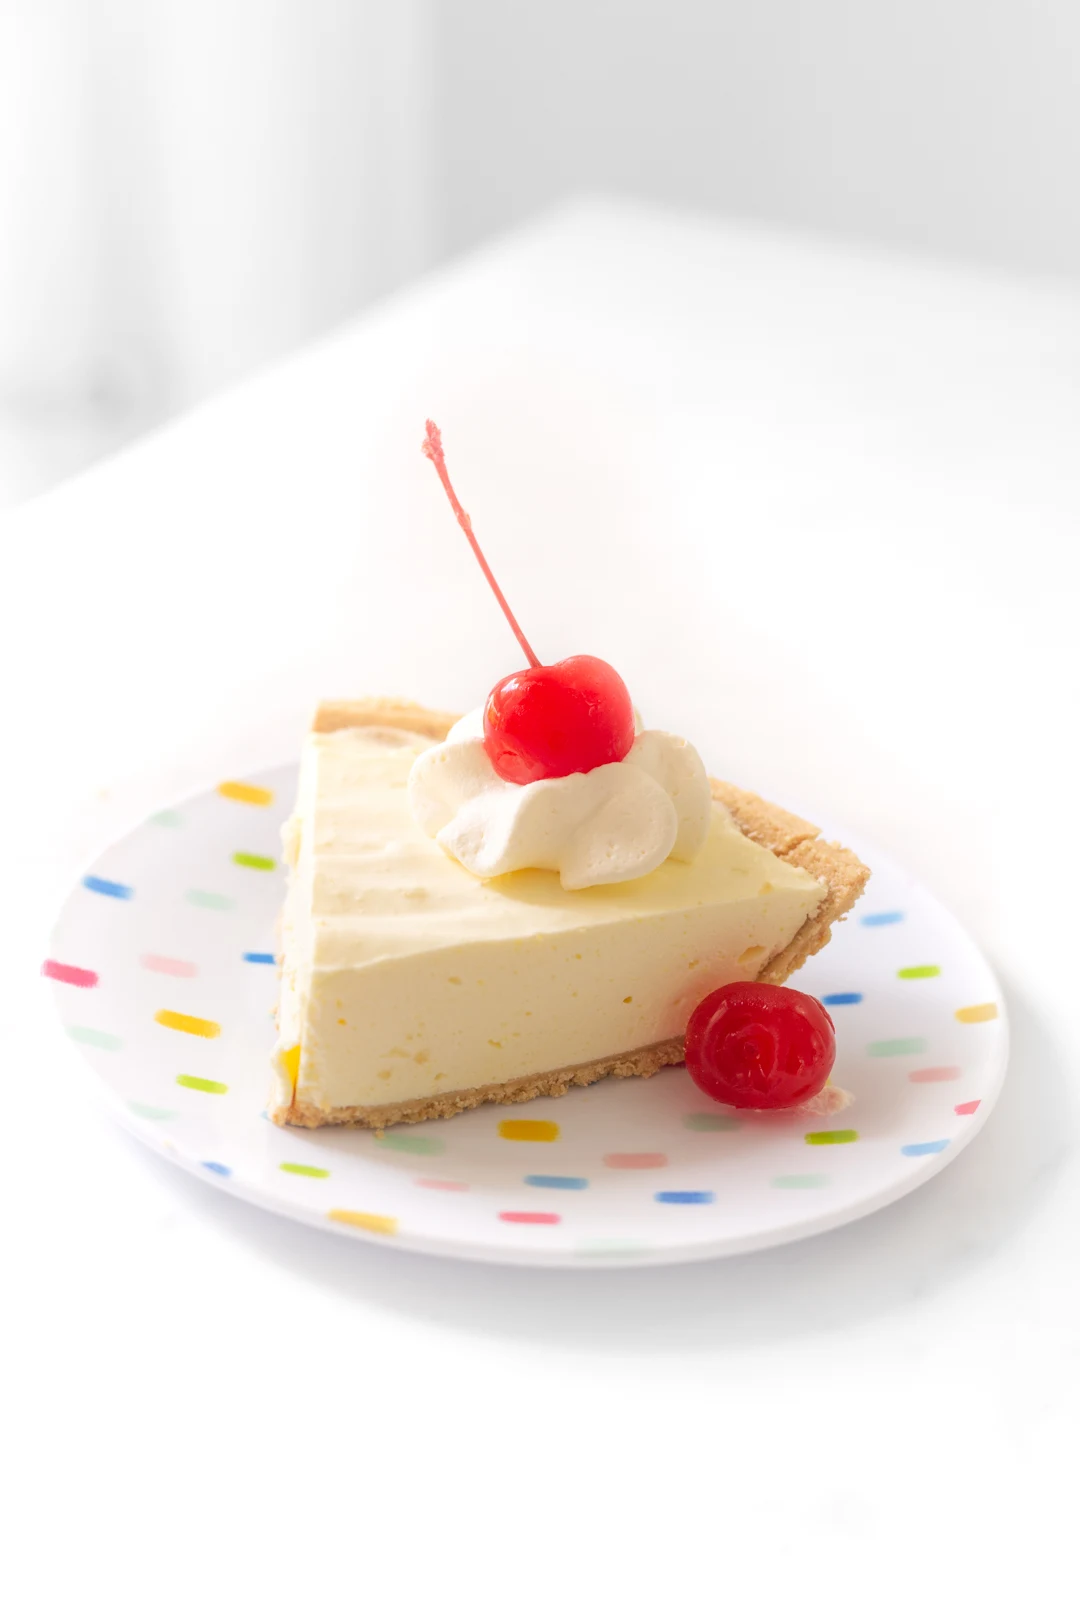 a slice of pineapple pie on a small plate and topped with a large stemmed cherry